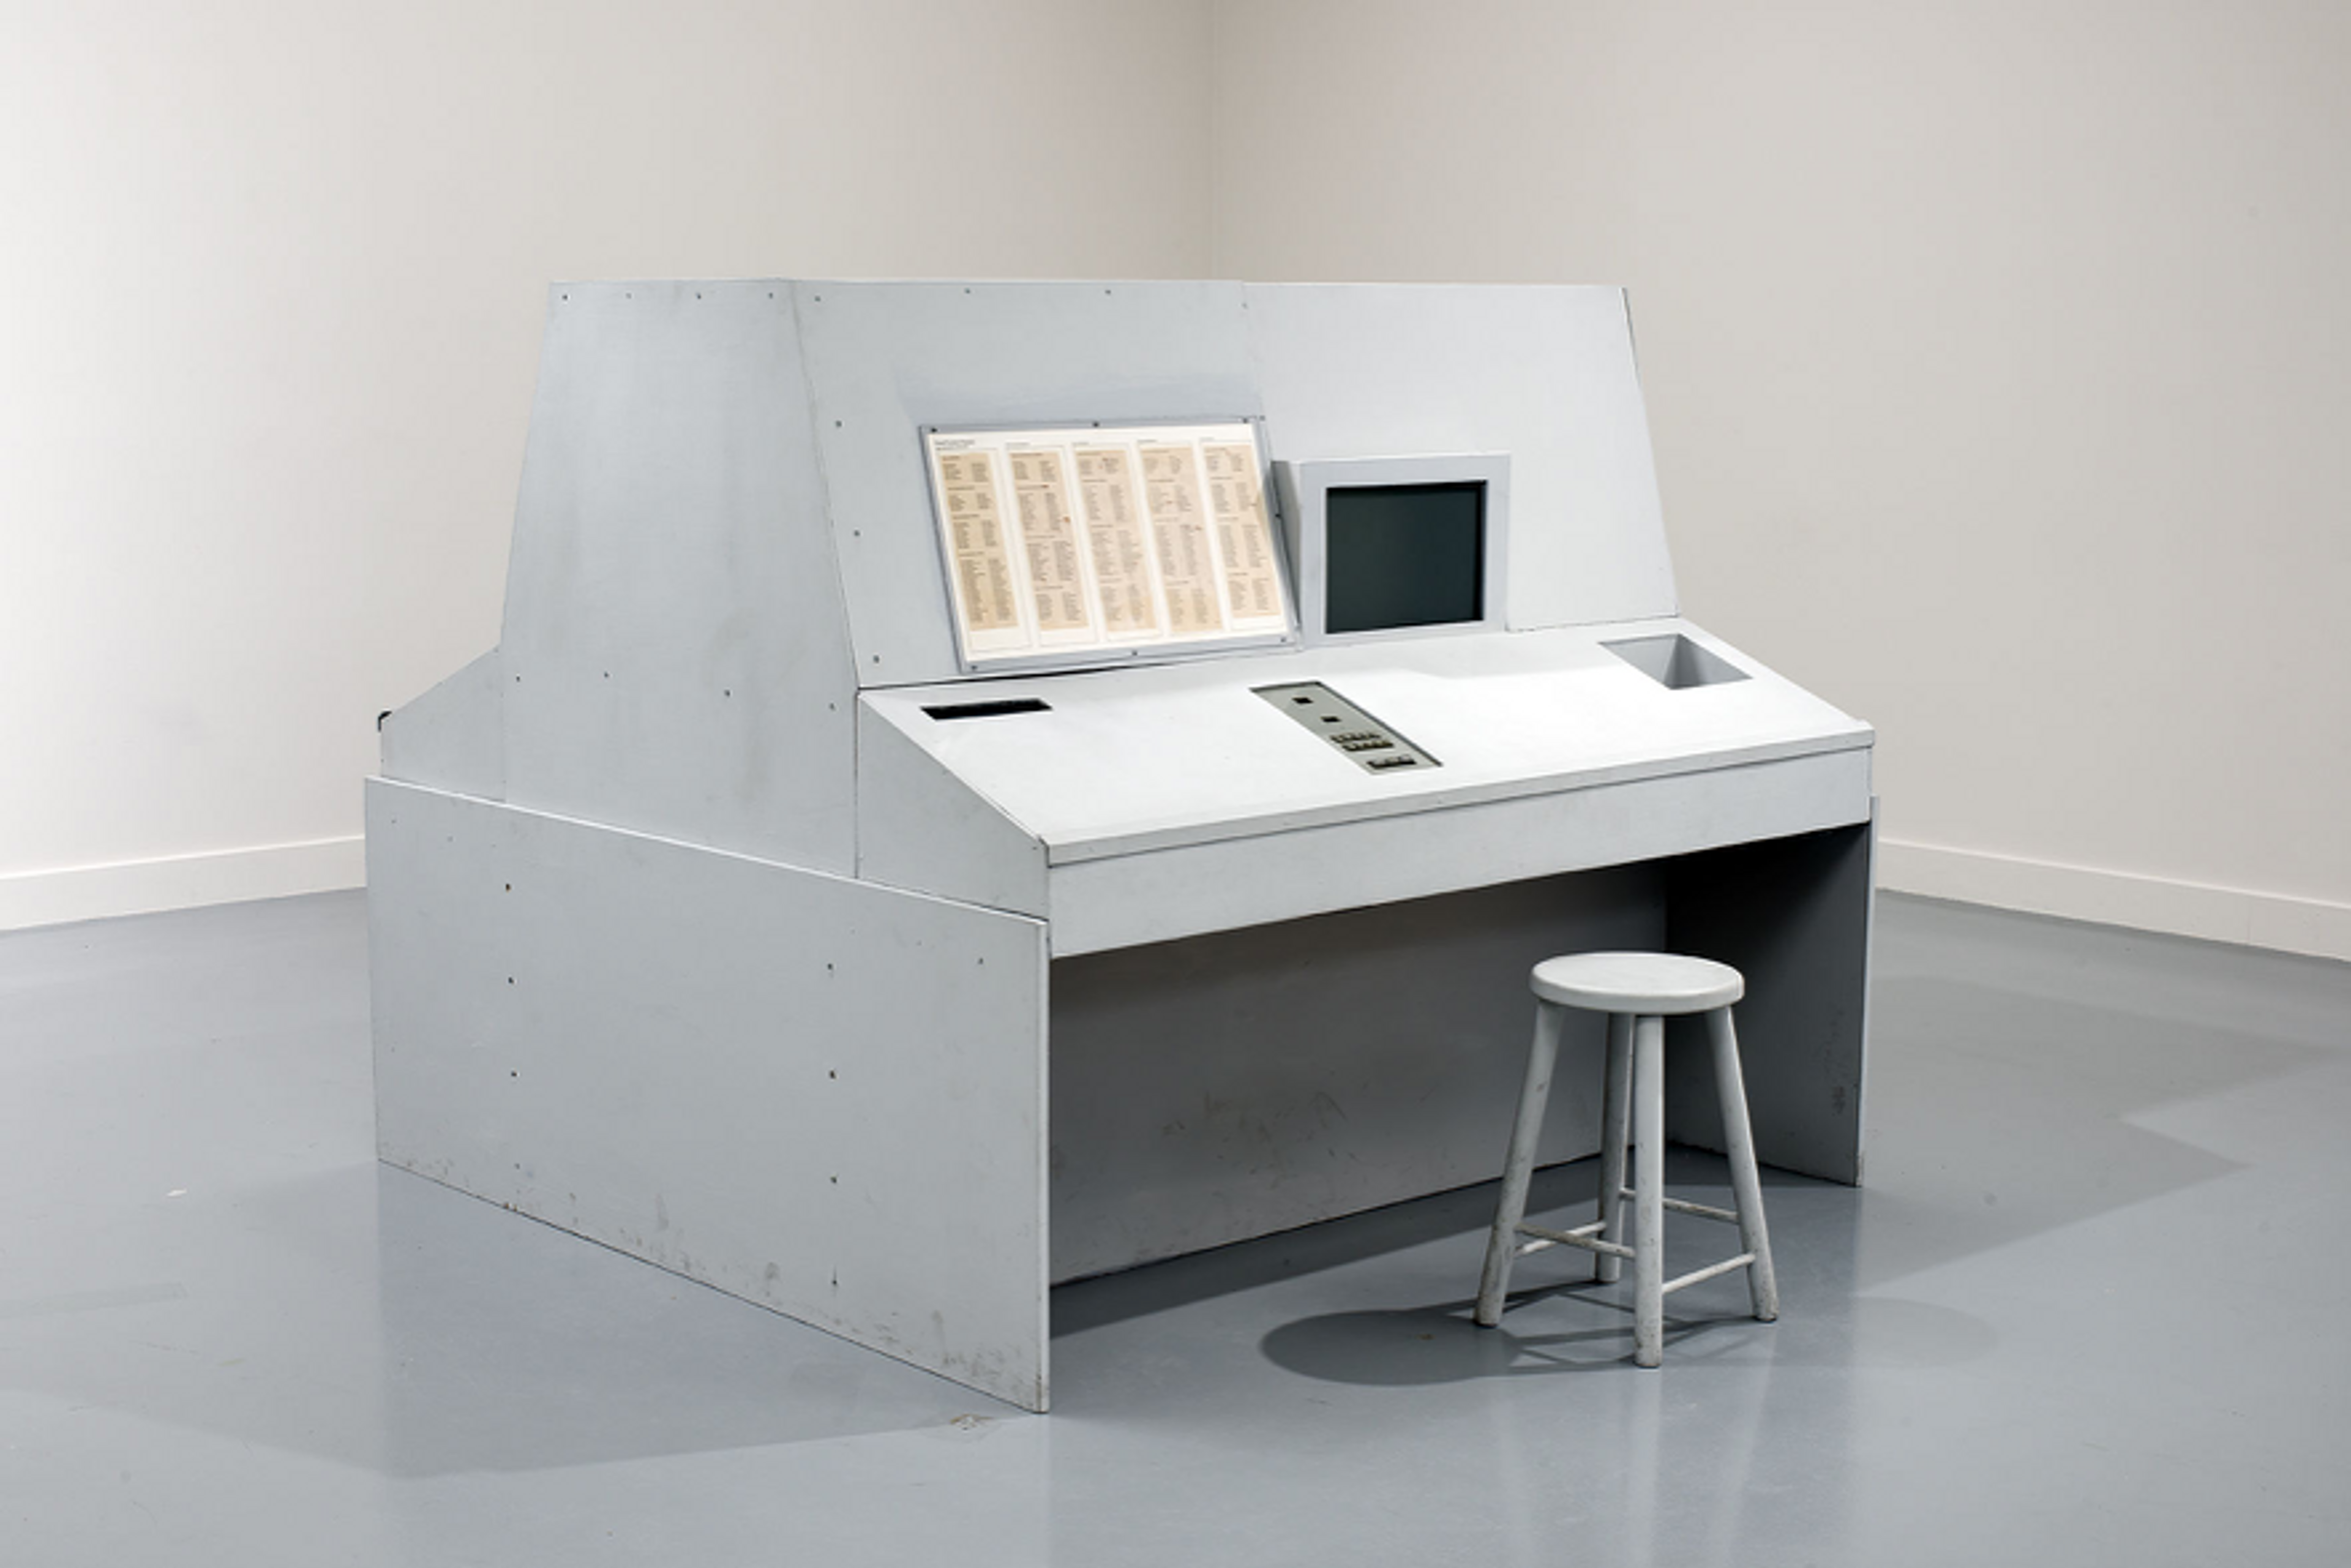 Stephen Willats, Meta Filter (1975) wood case, with electronics and slide projector mounted inside; Perspex screens on each side of case; Problem Book used by operators, 152.5 &times; 183 &times; 152.5 cm, Museé d&rsquo;art contemporain de Lyon